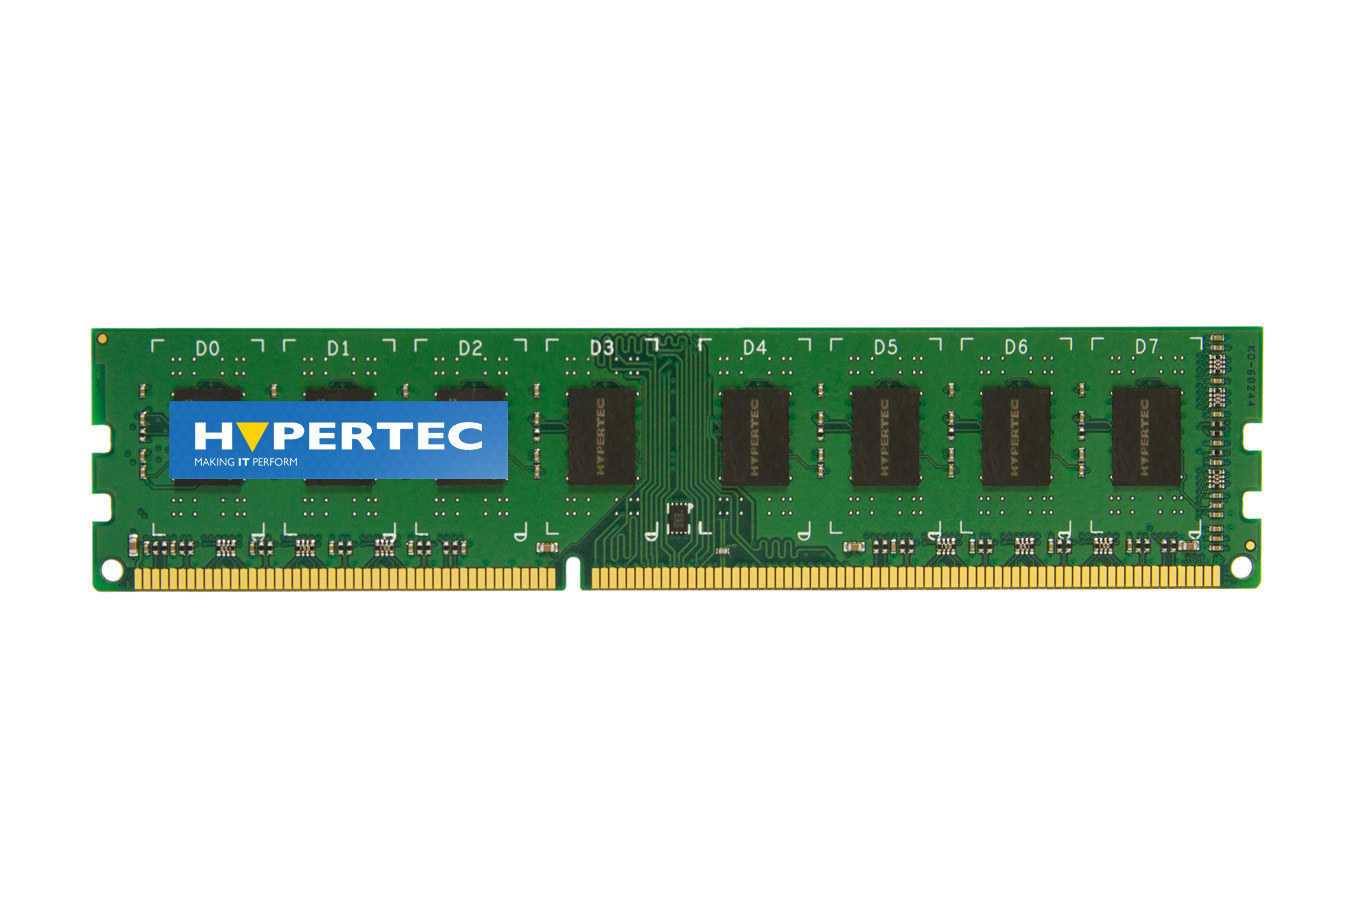 A4838319-HY HYPERTEC A Dell equivalent 4 GB Dual rank - unbuffered Non-ECC DDR3 SDRAM - DIMM 240-pin 1333 Mhz Legacy ( PC3-10600 ) from Hypertec